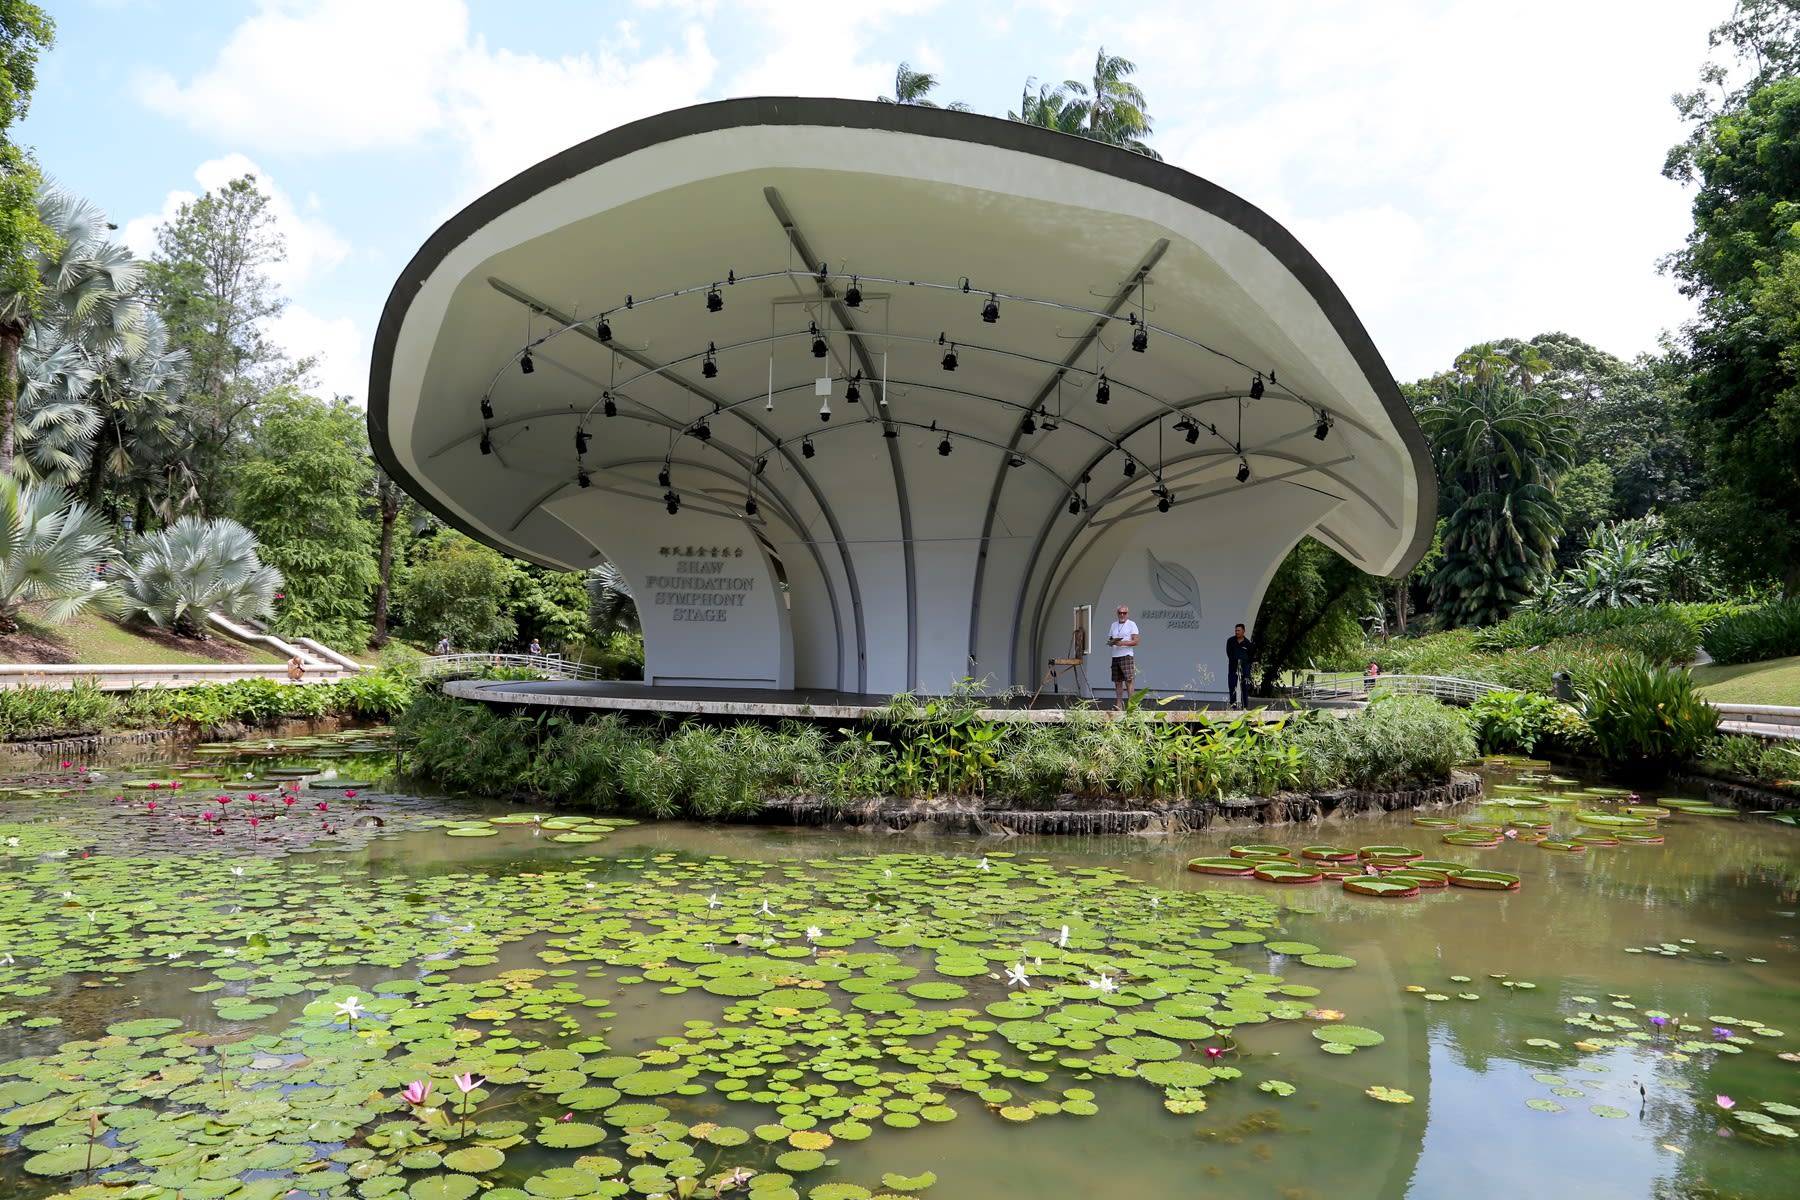 29 AUGUST 2019 SHAW FOUNDATION SYMPHONY STAGE, SINGAPORE BOTANIC GARDENS Victoria Water Lilies photo: Agata Byrne